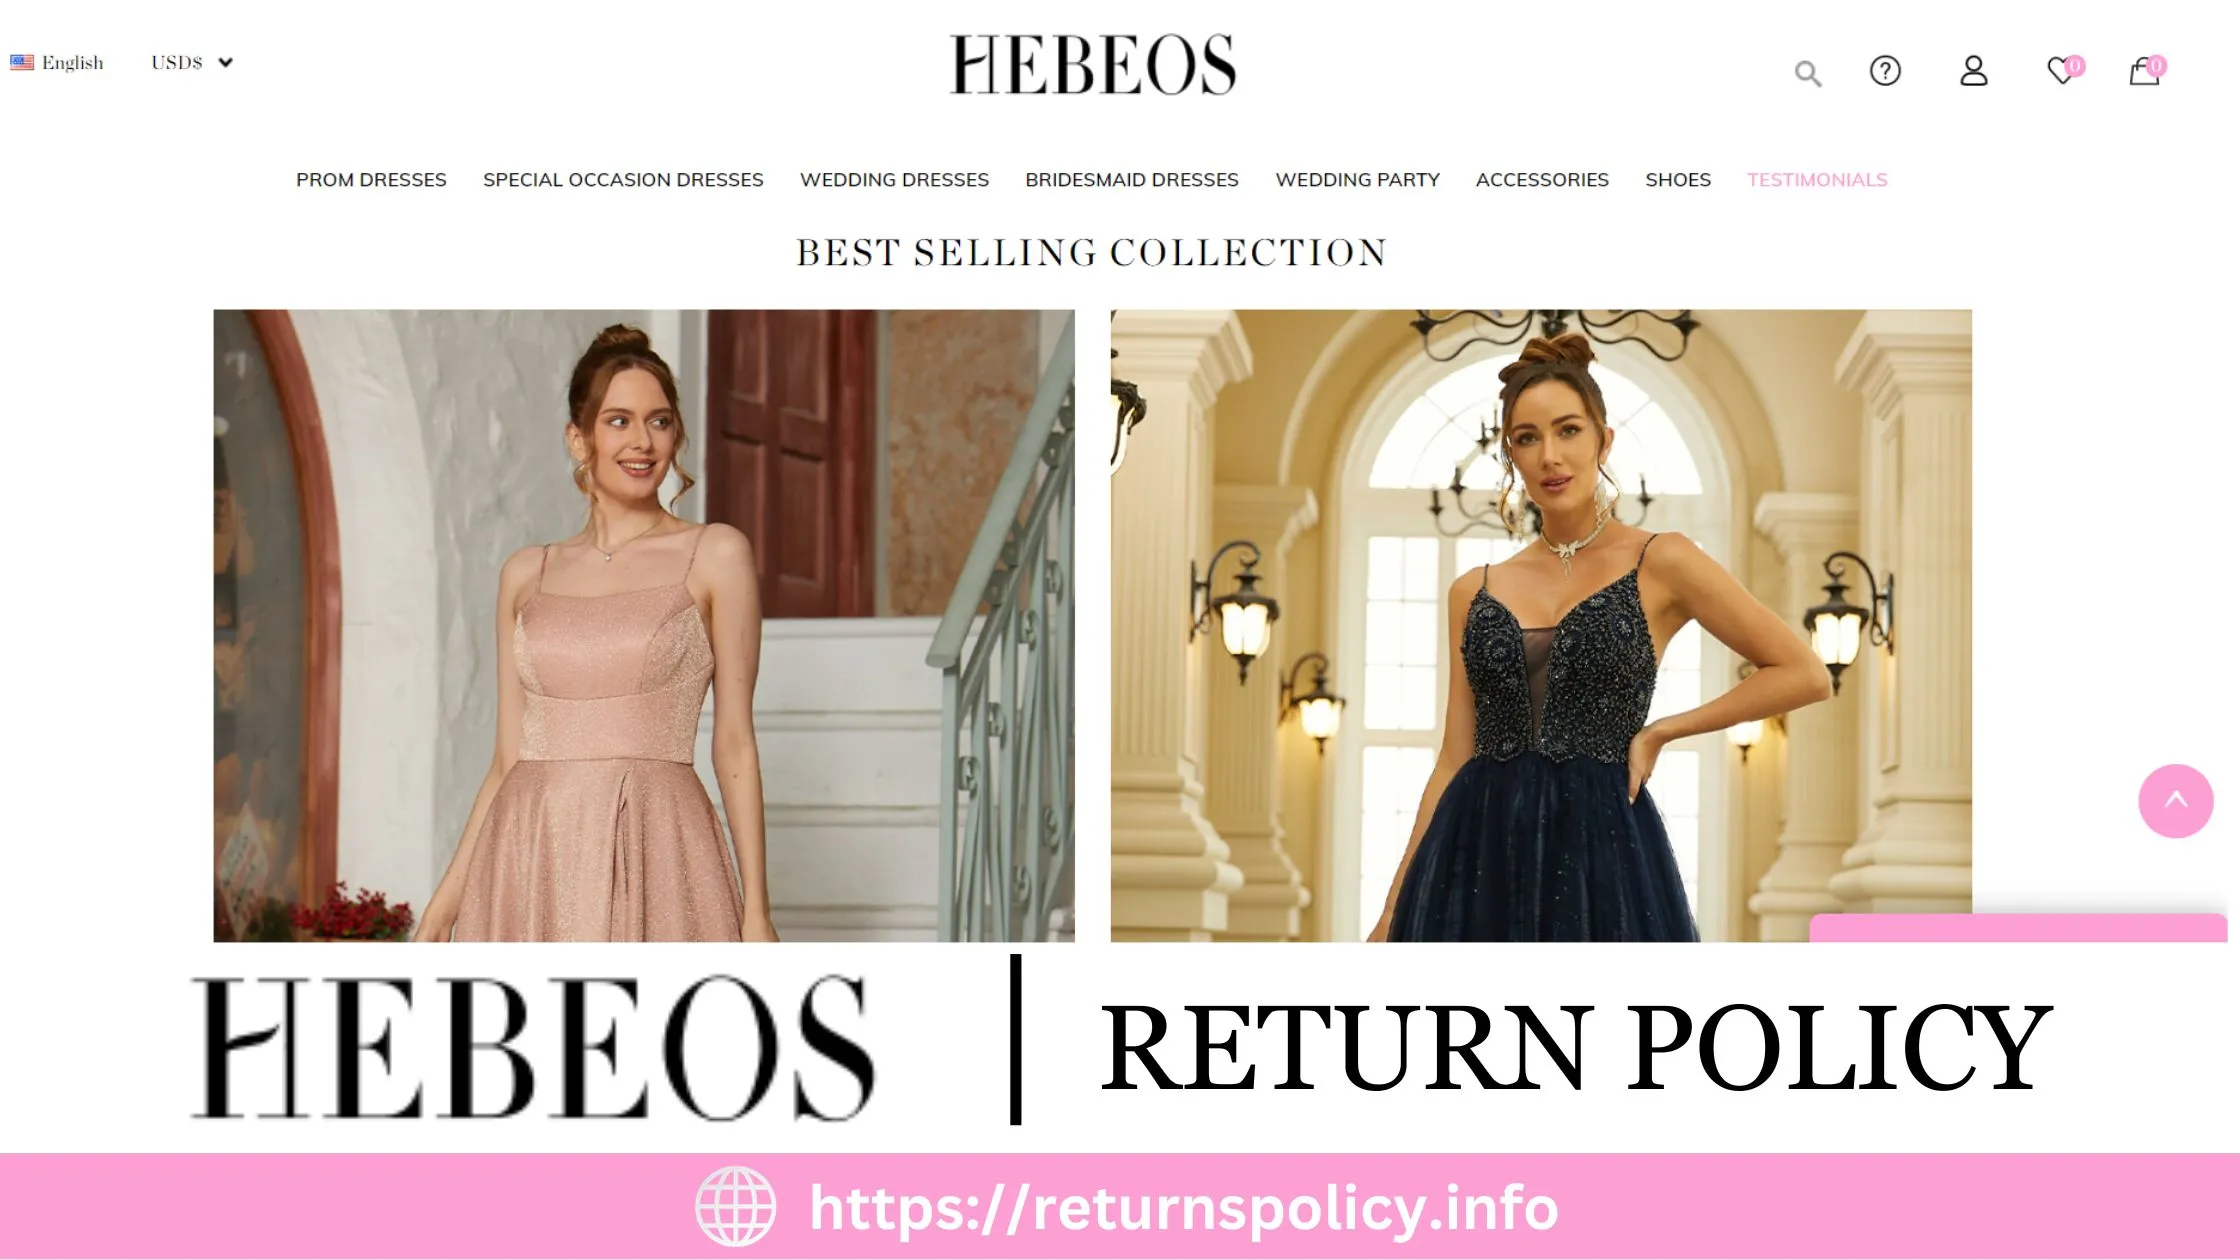 hebeos Return Policy